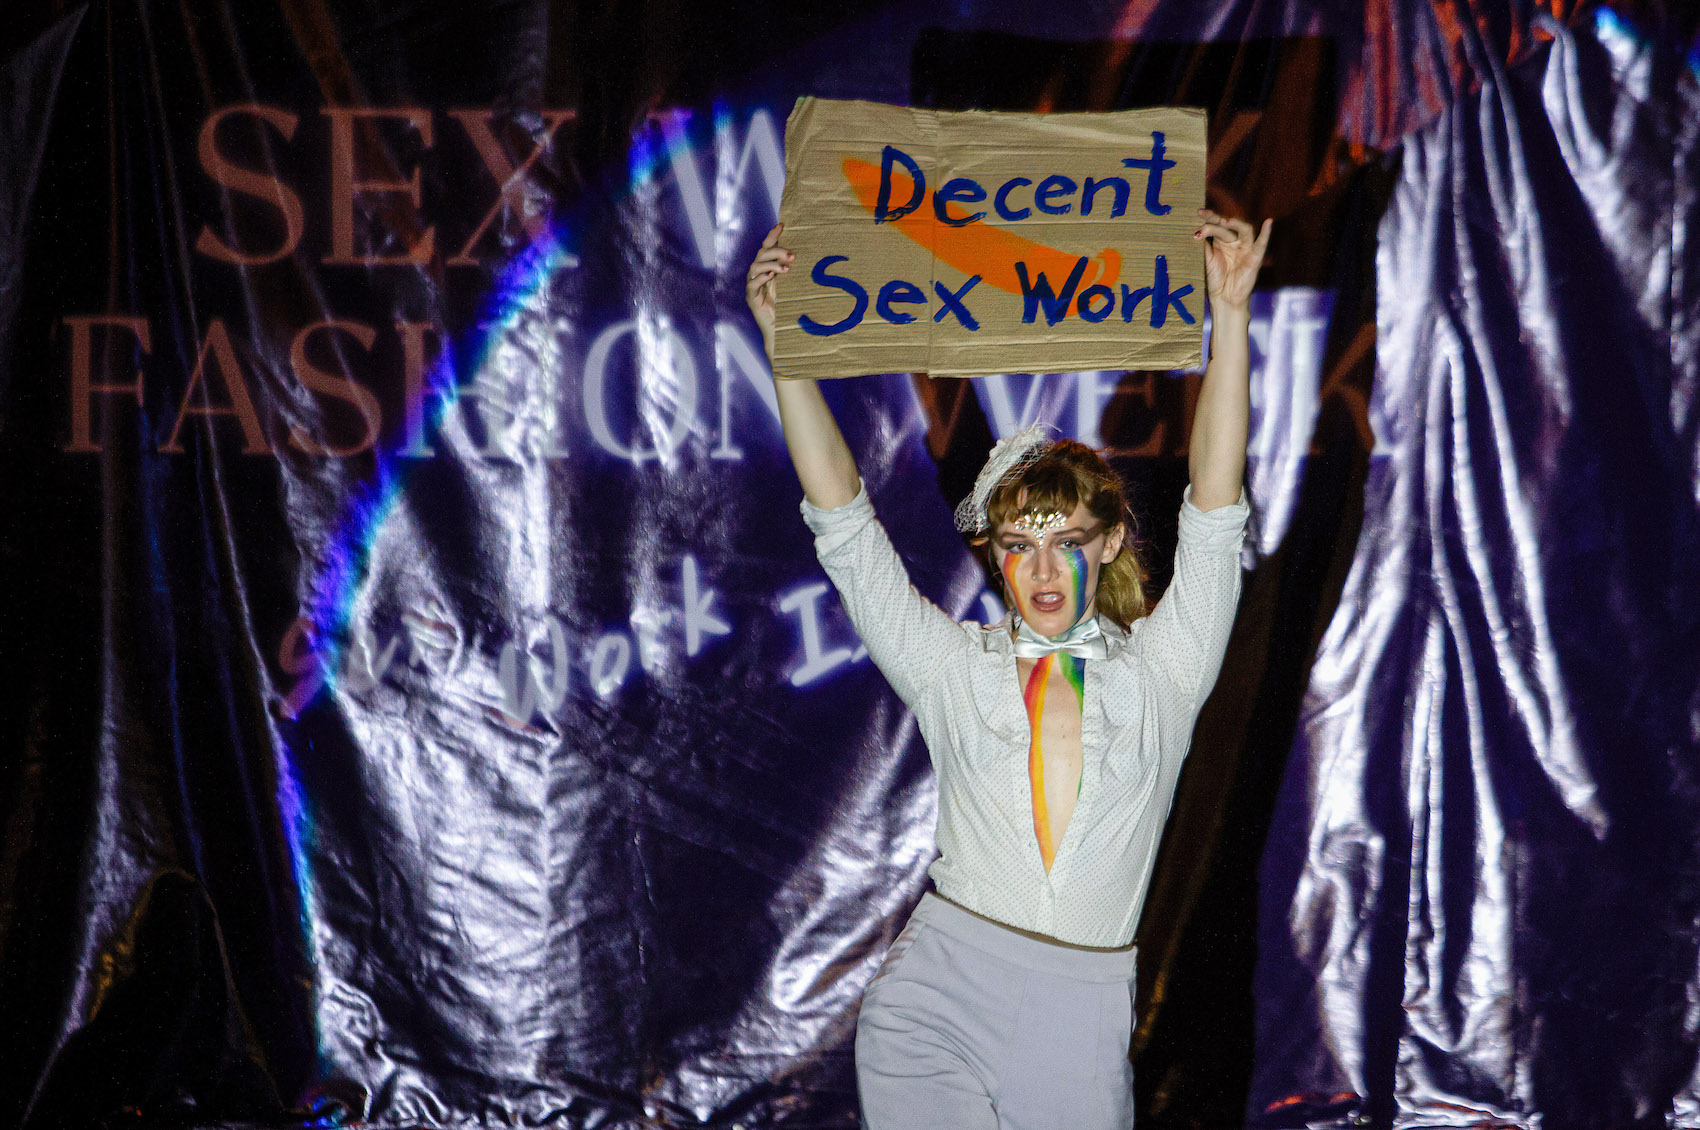 An activist holds a placard that says "Decent Sex Work" during a Sex Work Fashion Week on International Labor Day at the Tha Phae Gate